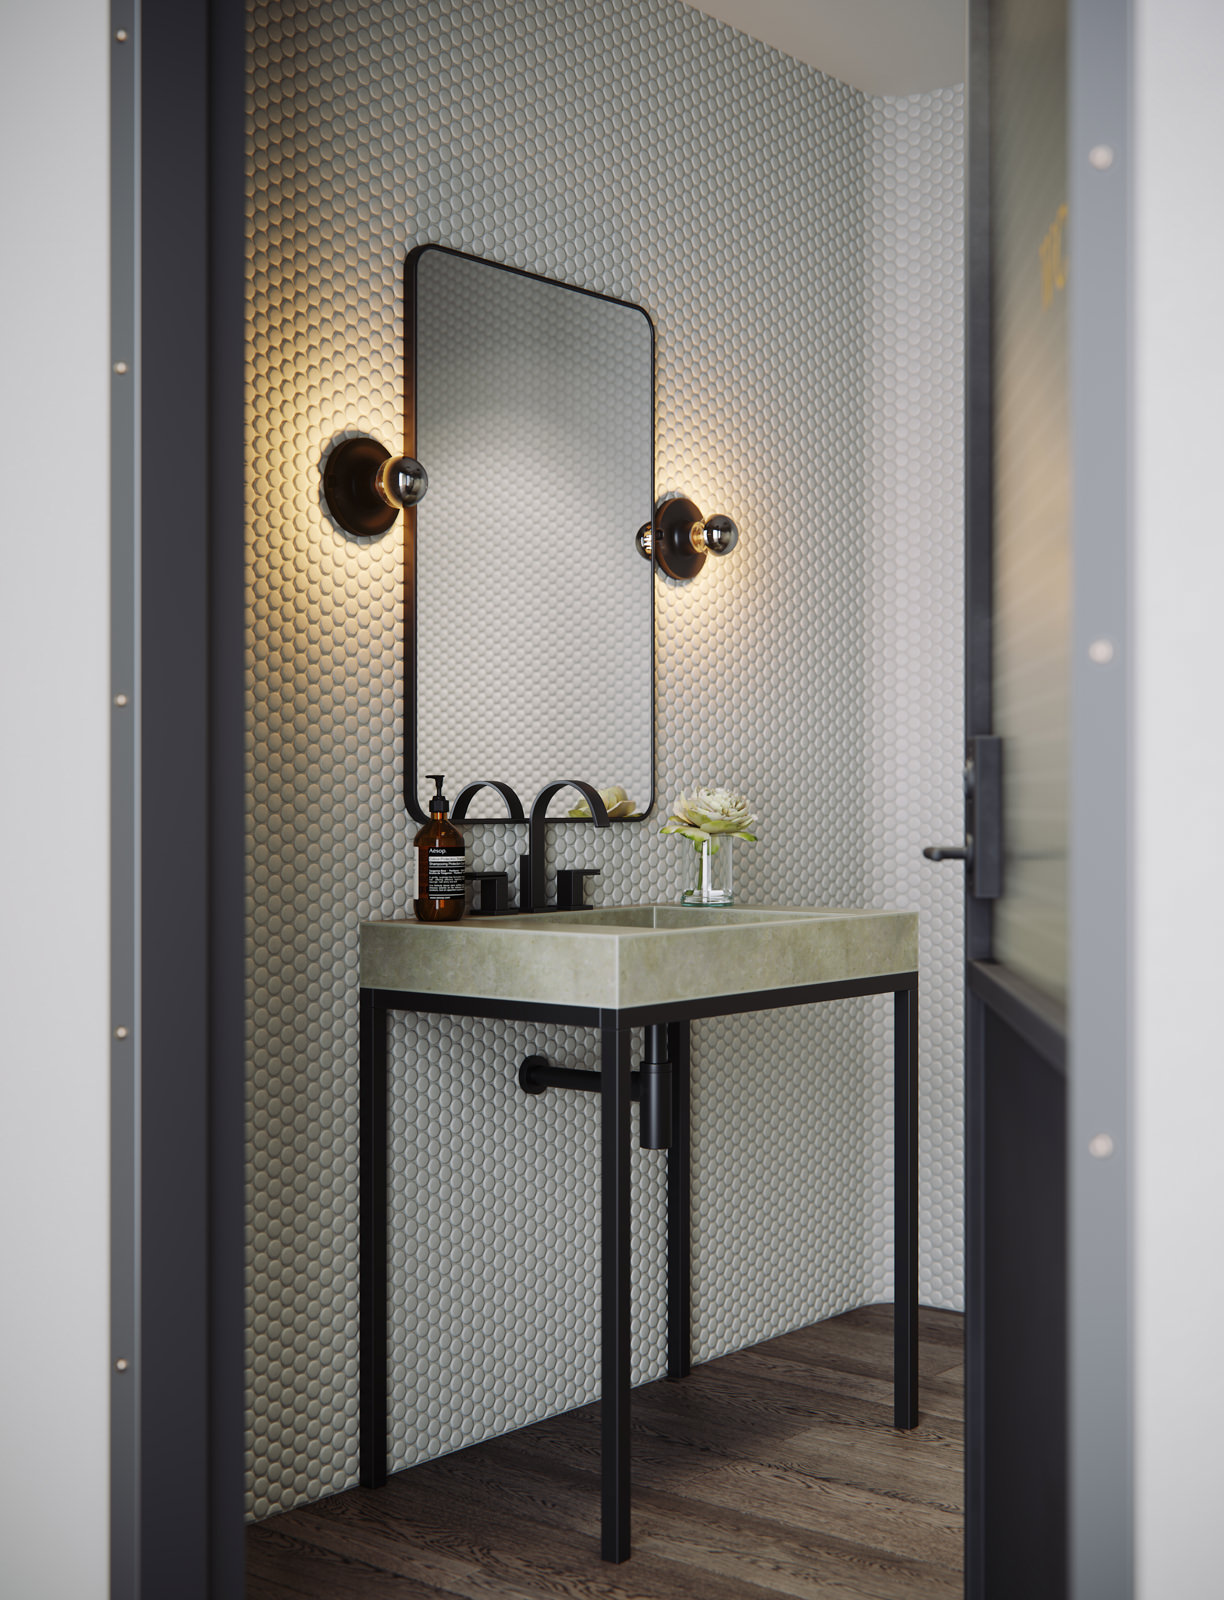 3D rendering of an off-white stone sink installed on a black steel construction with a mirror and two sconces over it in a light bathroom interior